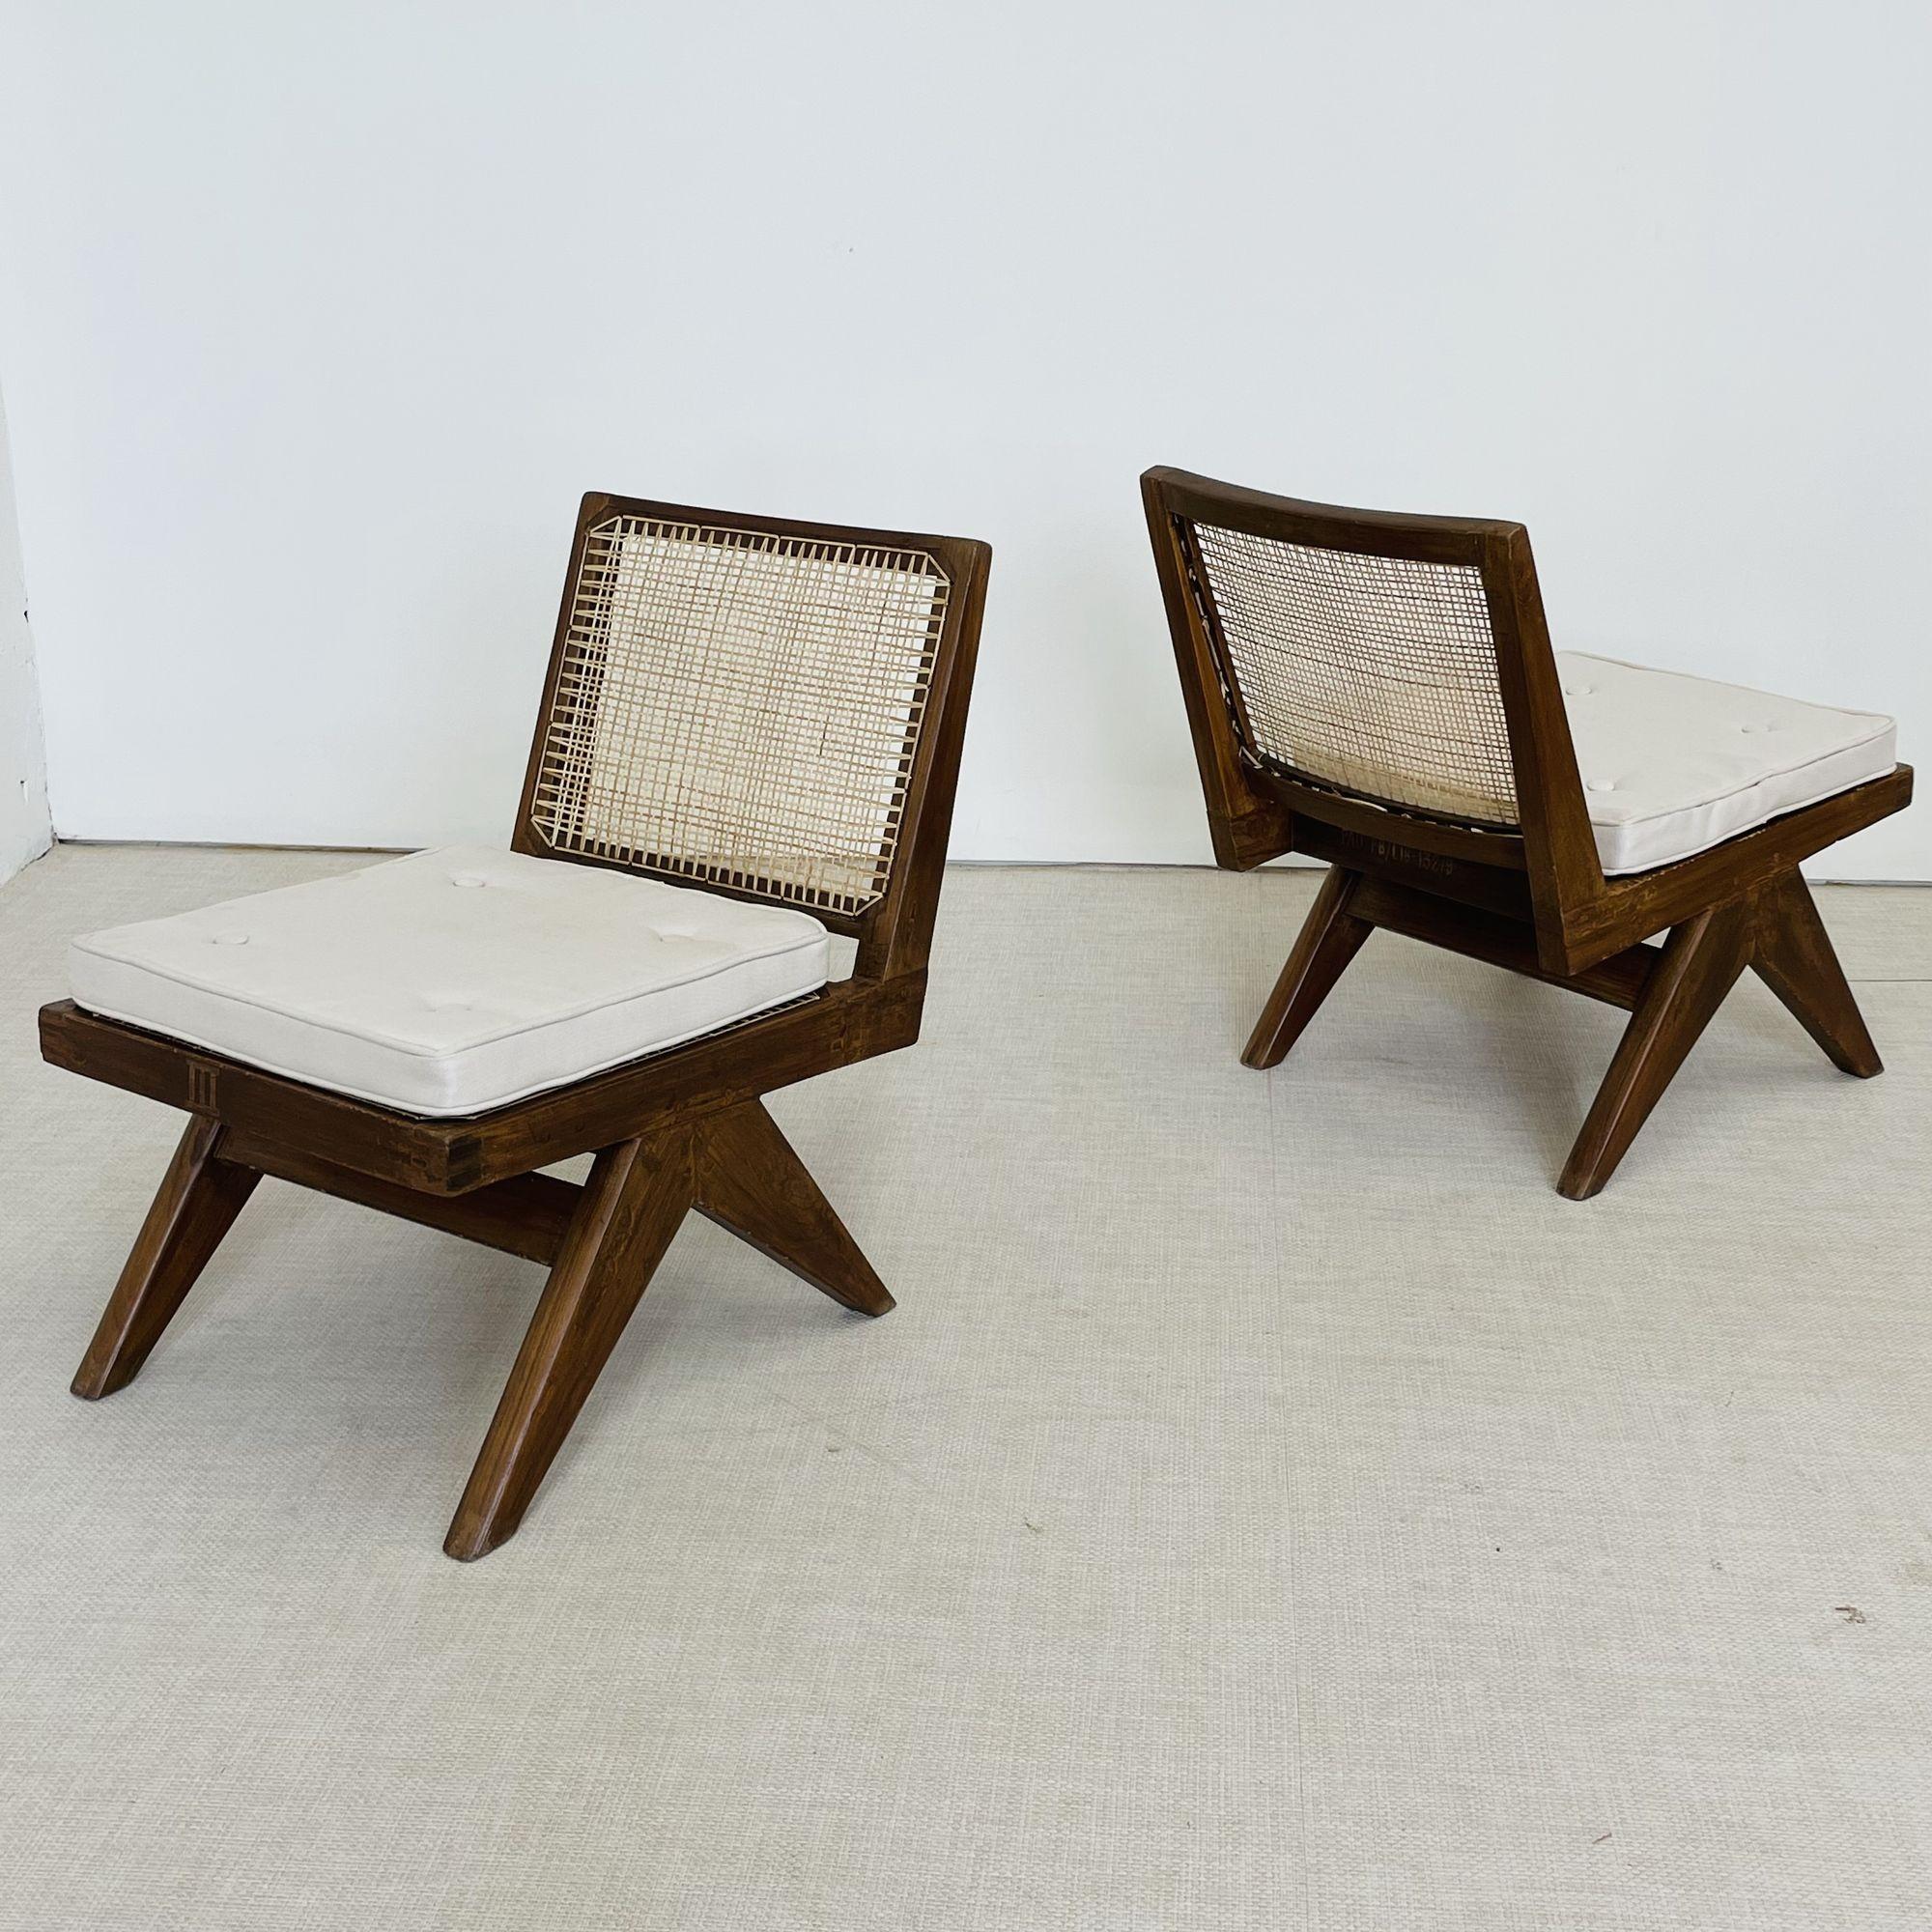 Pierre Jeanneret 'Armless Easy Chairs', Model PJ-SI-35-A
 
This rare armless variation of the low easy chair features a tilted, slightly curved backrest on top of a compass style double sided v-leg base assembly. Both chairs come with new two inch